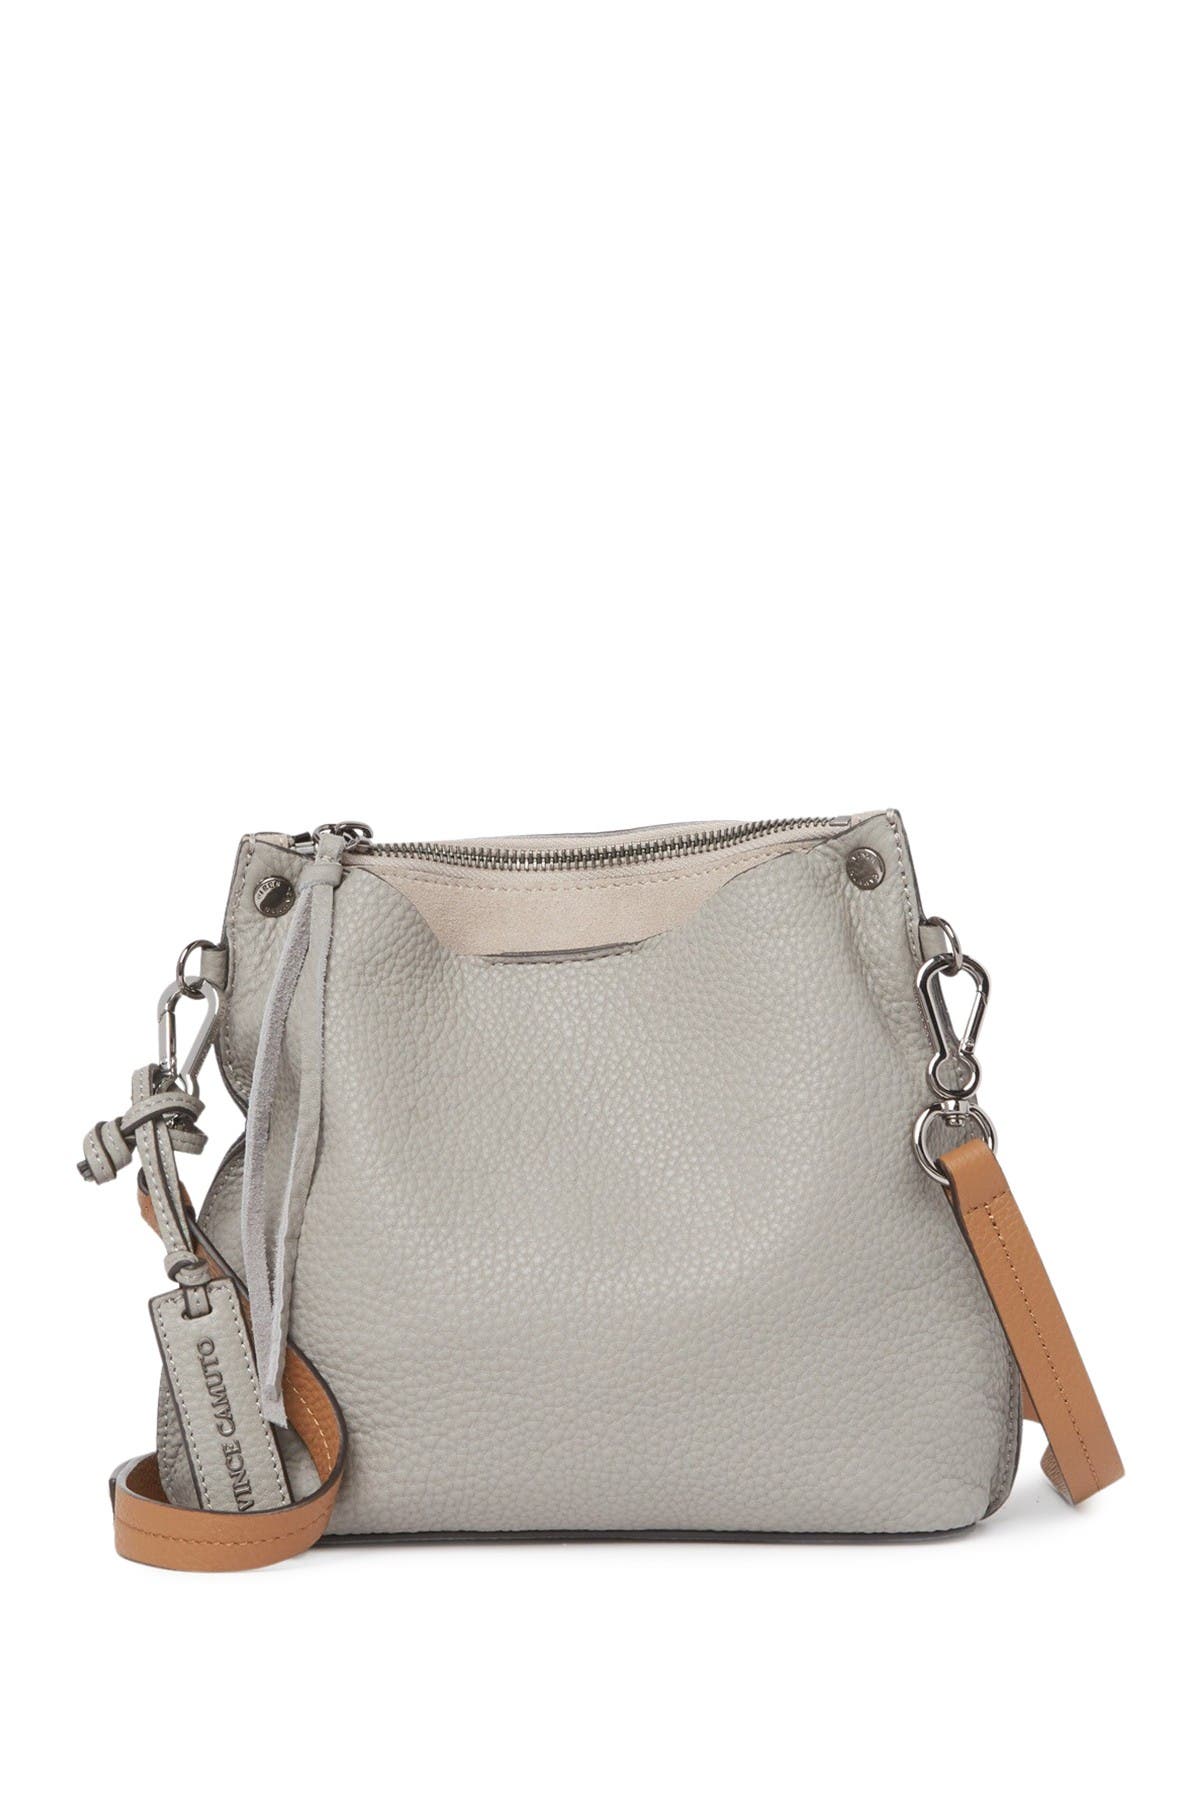 Vince Camuto Mayln Leather Crossbody Bag In Open Grey